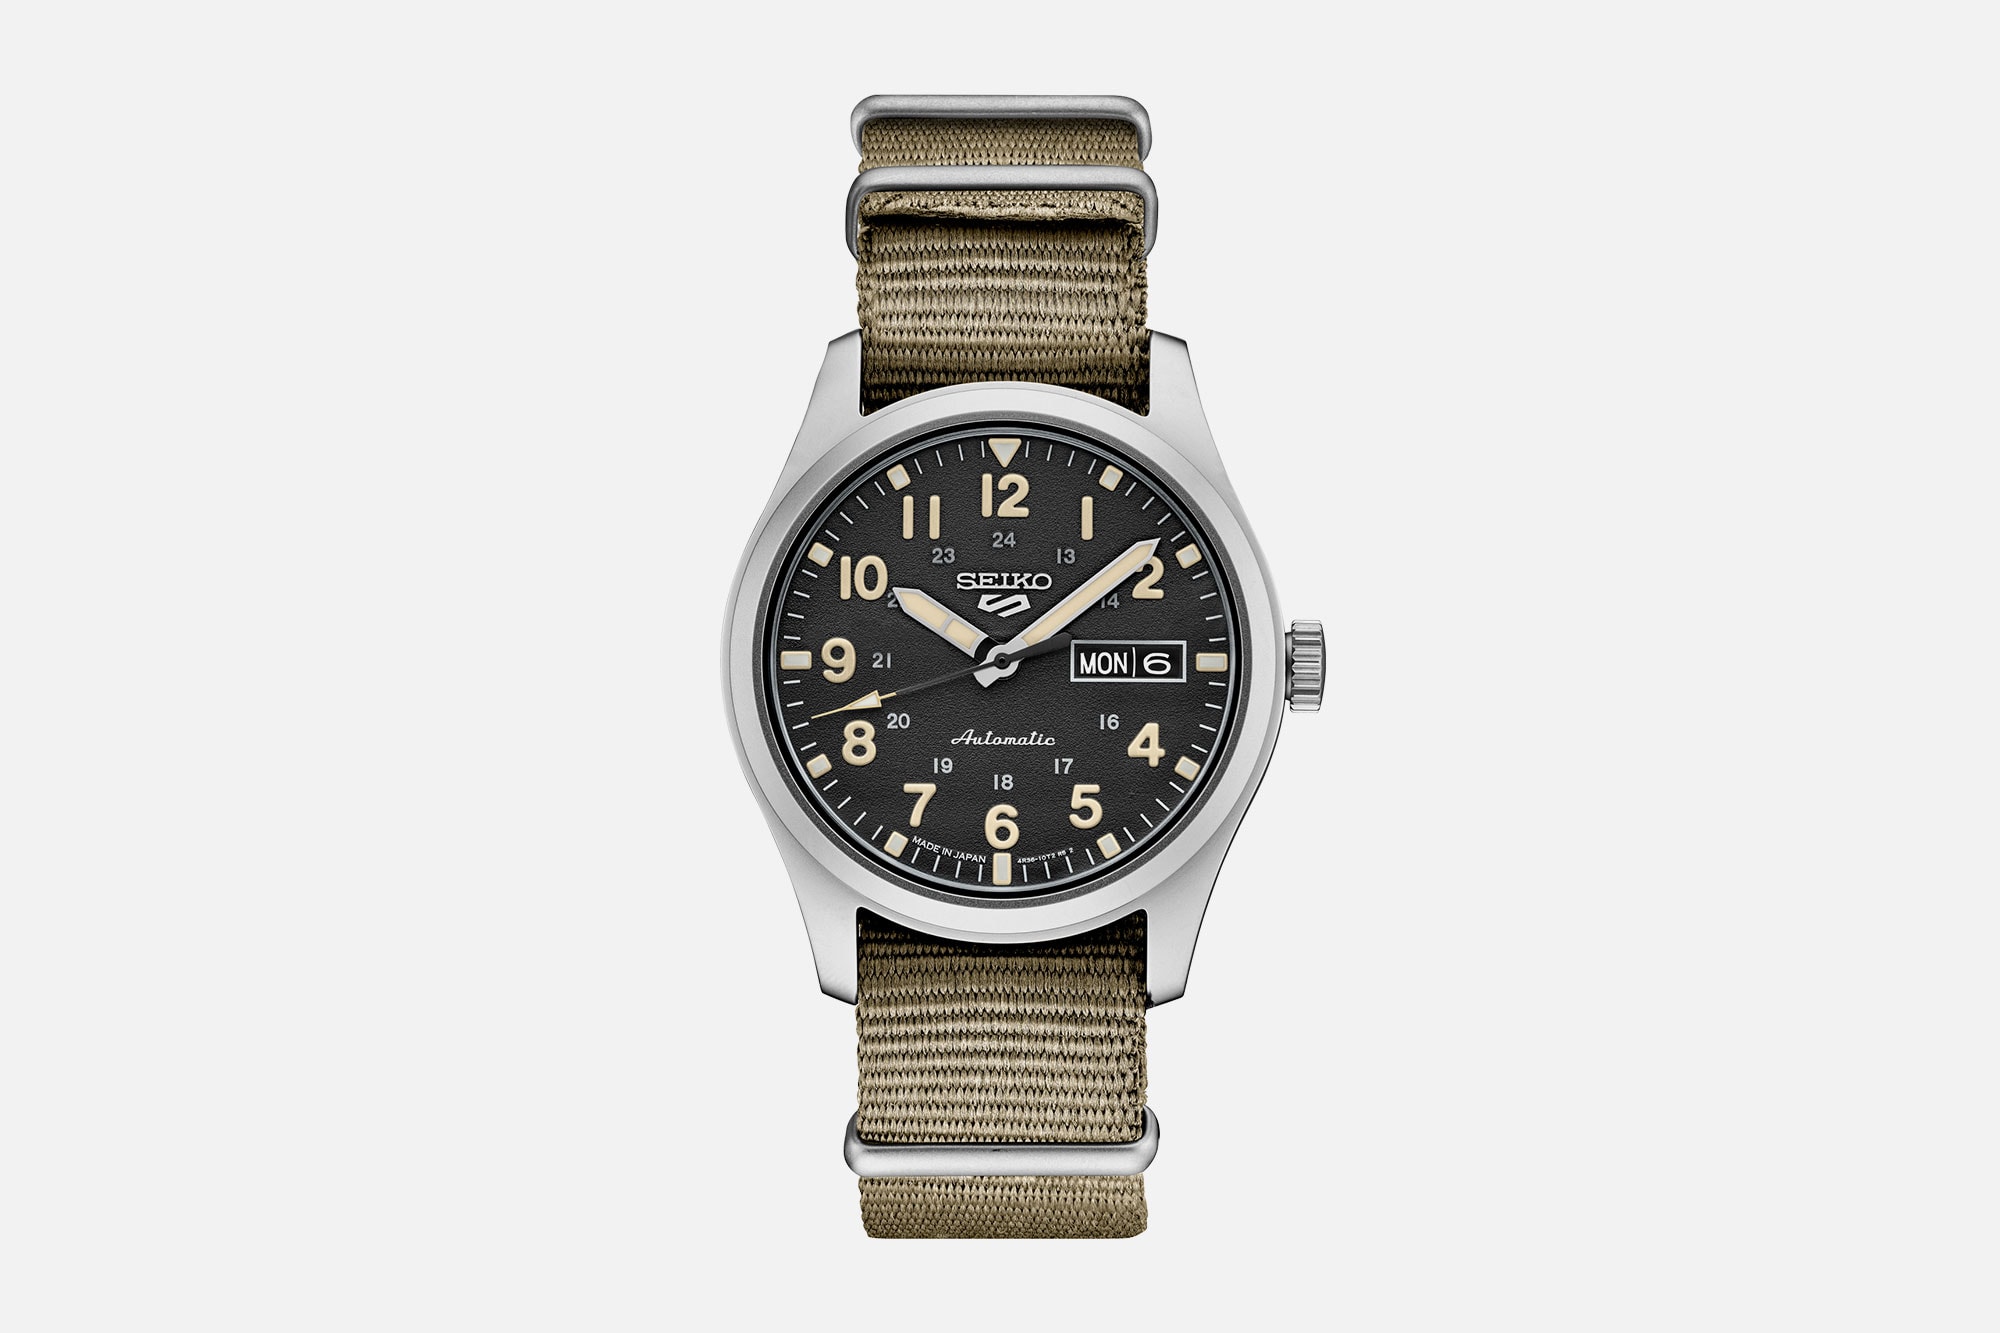 The Seiko 5 Sports Line is Refreshed with a New Field Watch Style - Worn &  Wound